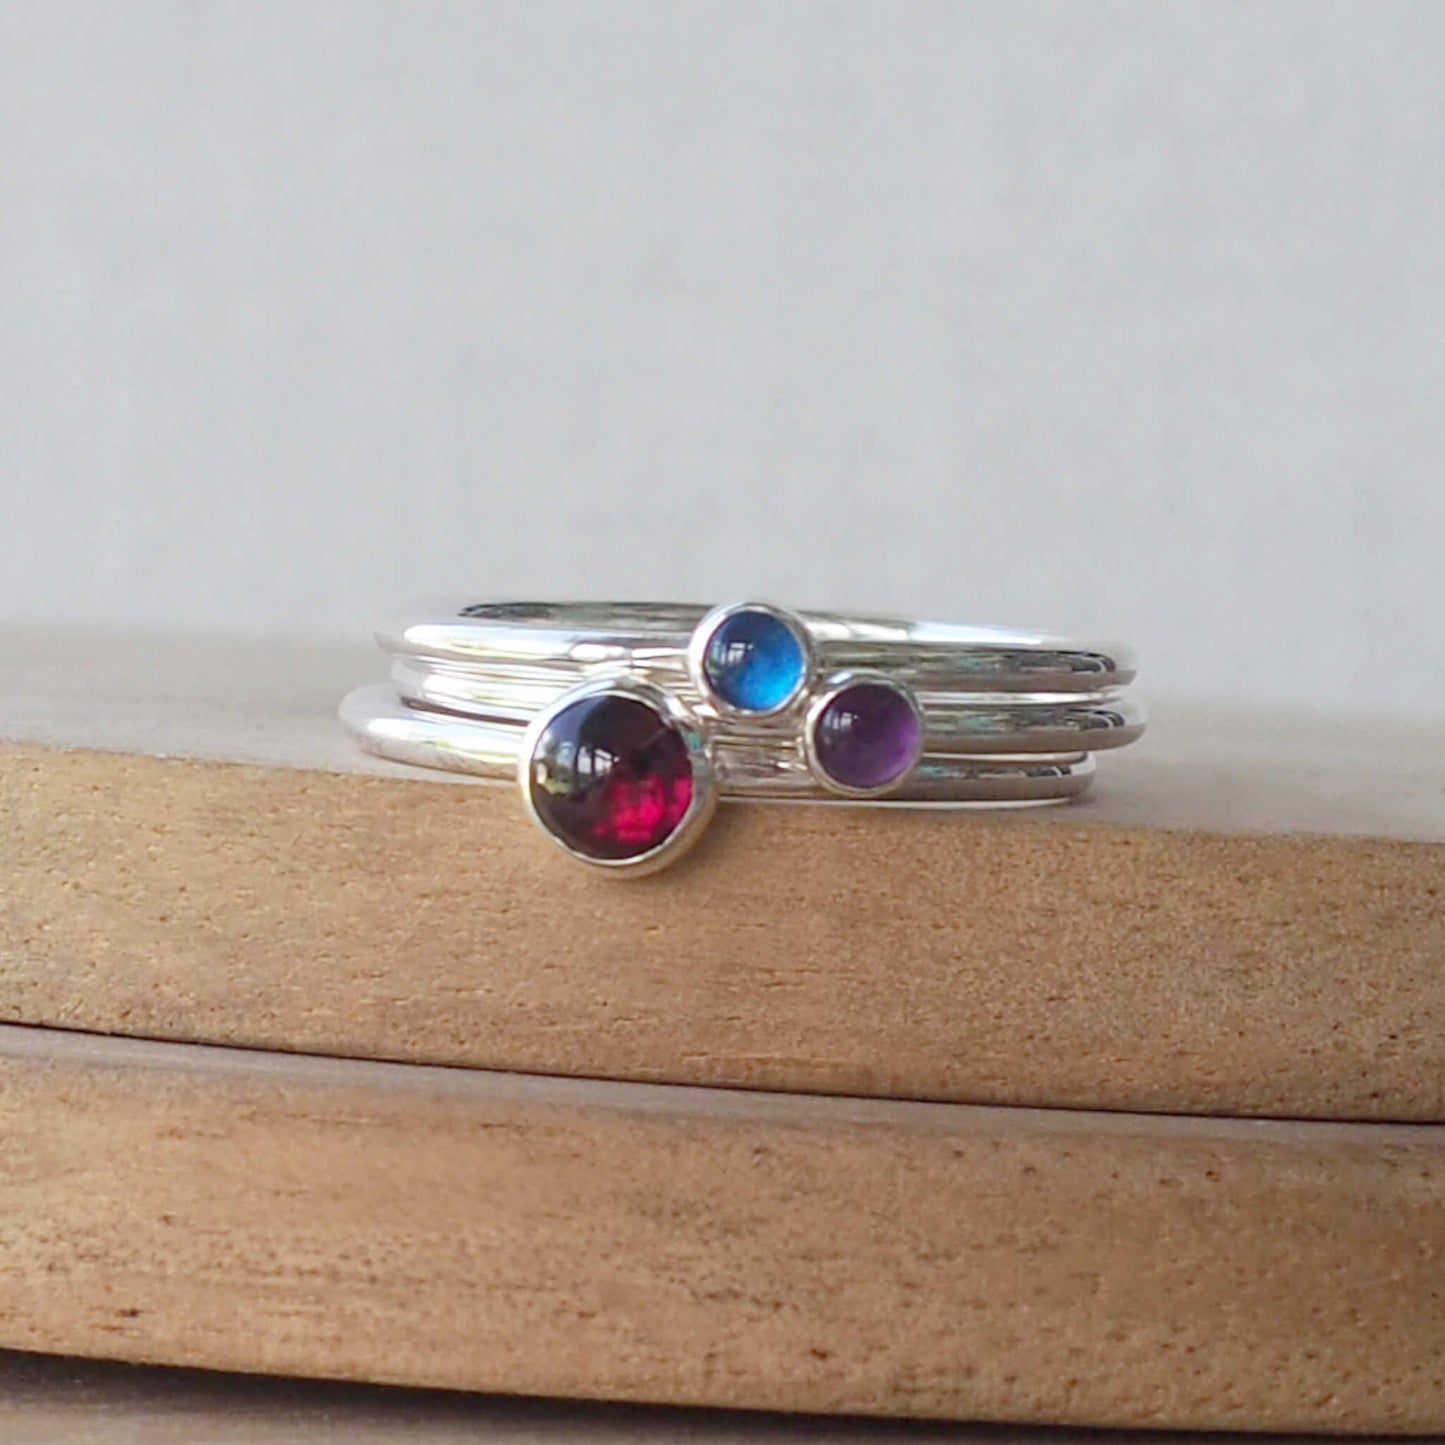 three ring set with your choice of birthstone Birthstones. THis set has a January birthstone ring with a 5mm round dark red cabochon smooth cut stone, A sapphire 3mm stone for September and a 3mm round purple amethyst for February. Handmade in Edinburgh by Maram Jewellery